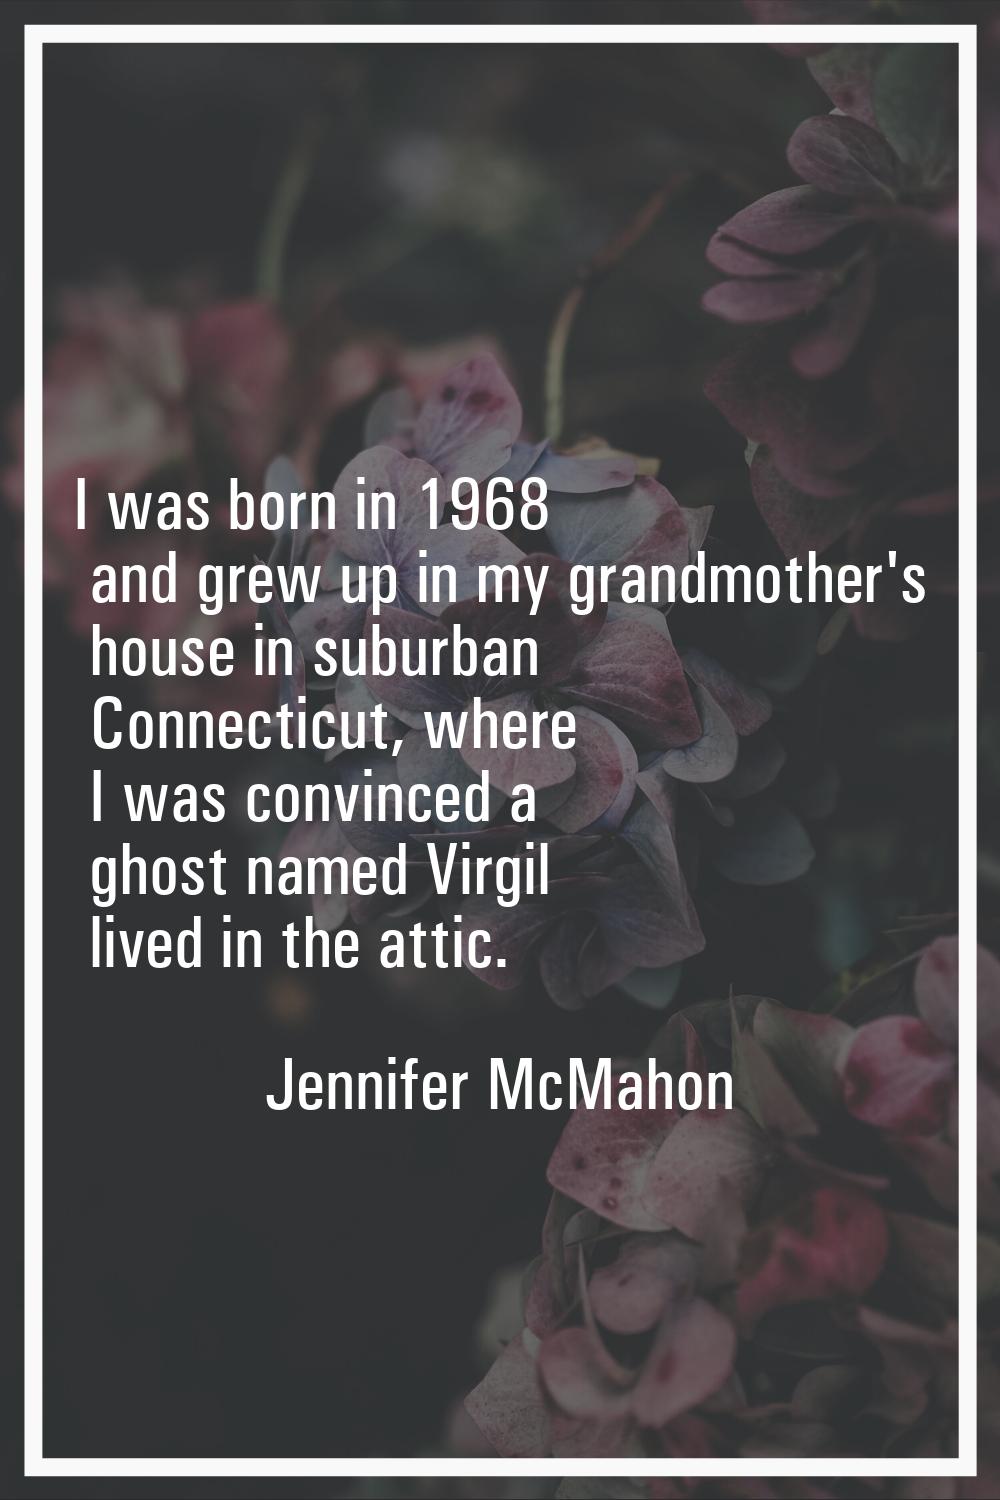 I was born in 1968 and grew up in my grandmother's house in suburban Connecticut, where I was convi